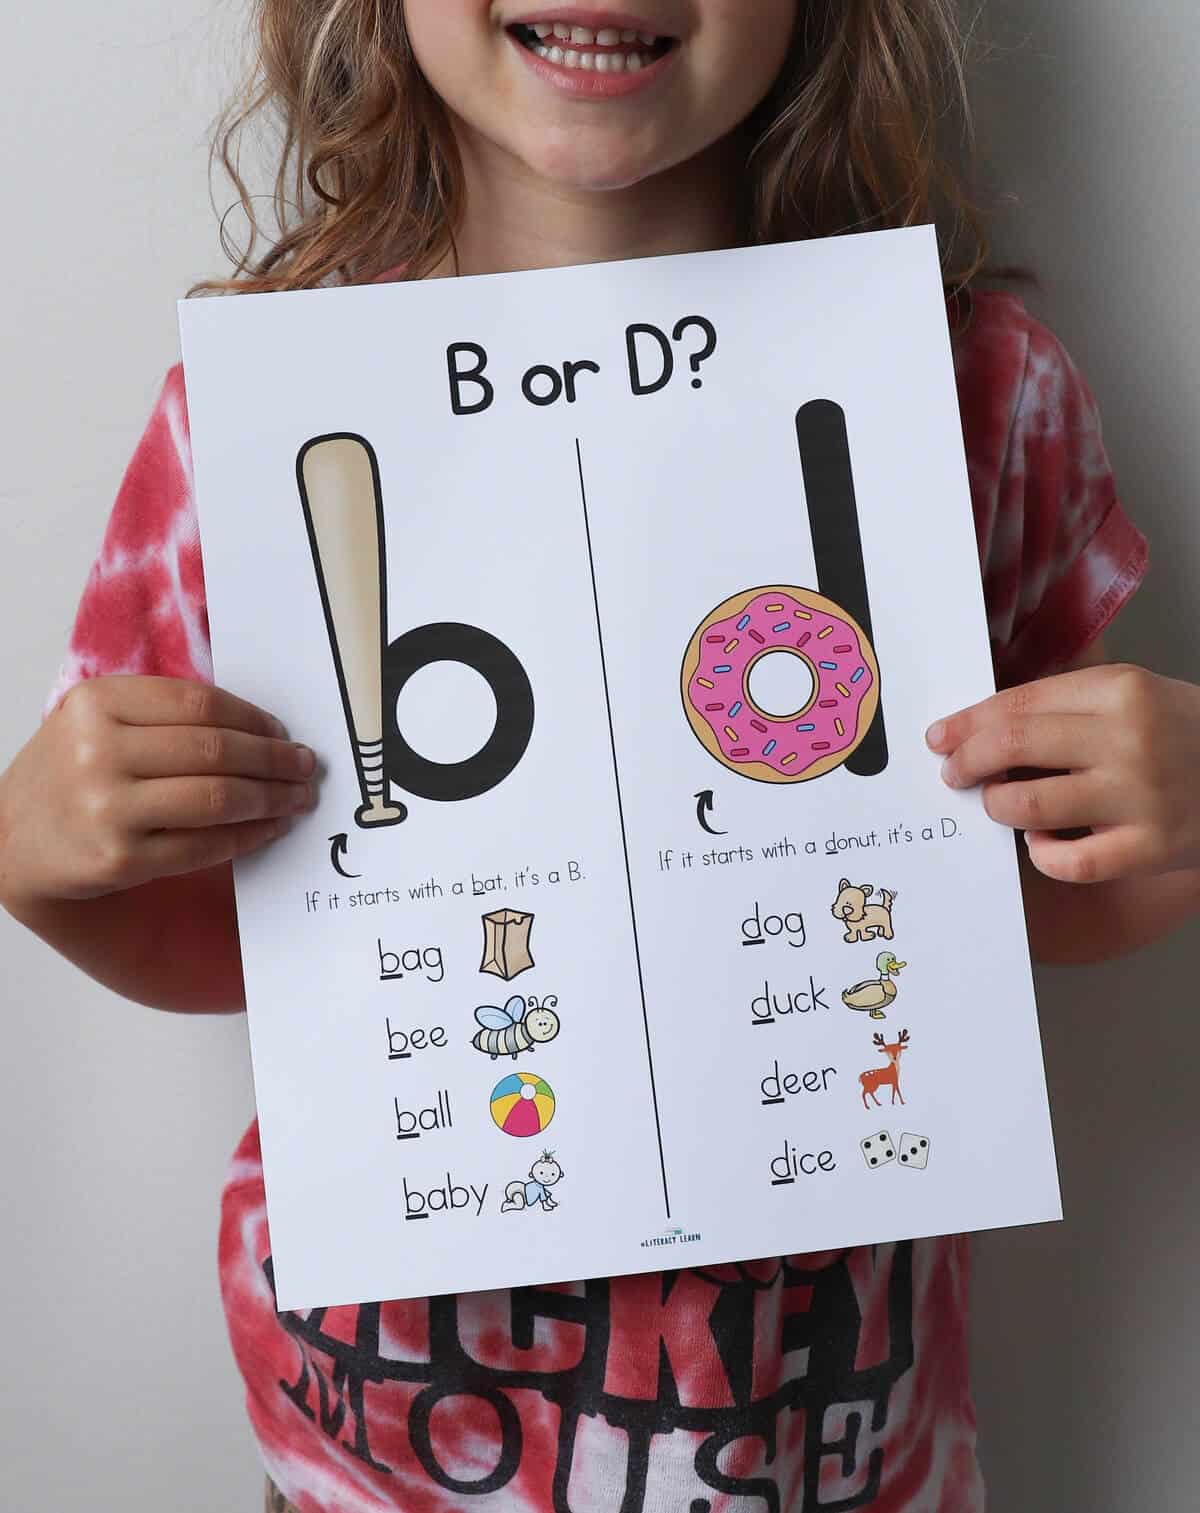 A child holding the colorful printed b/d reversal poster.